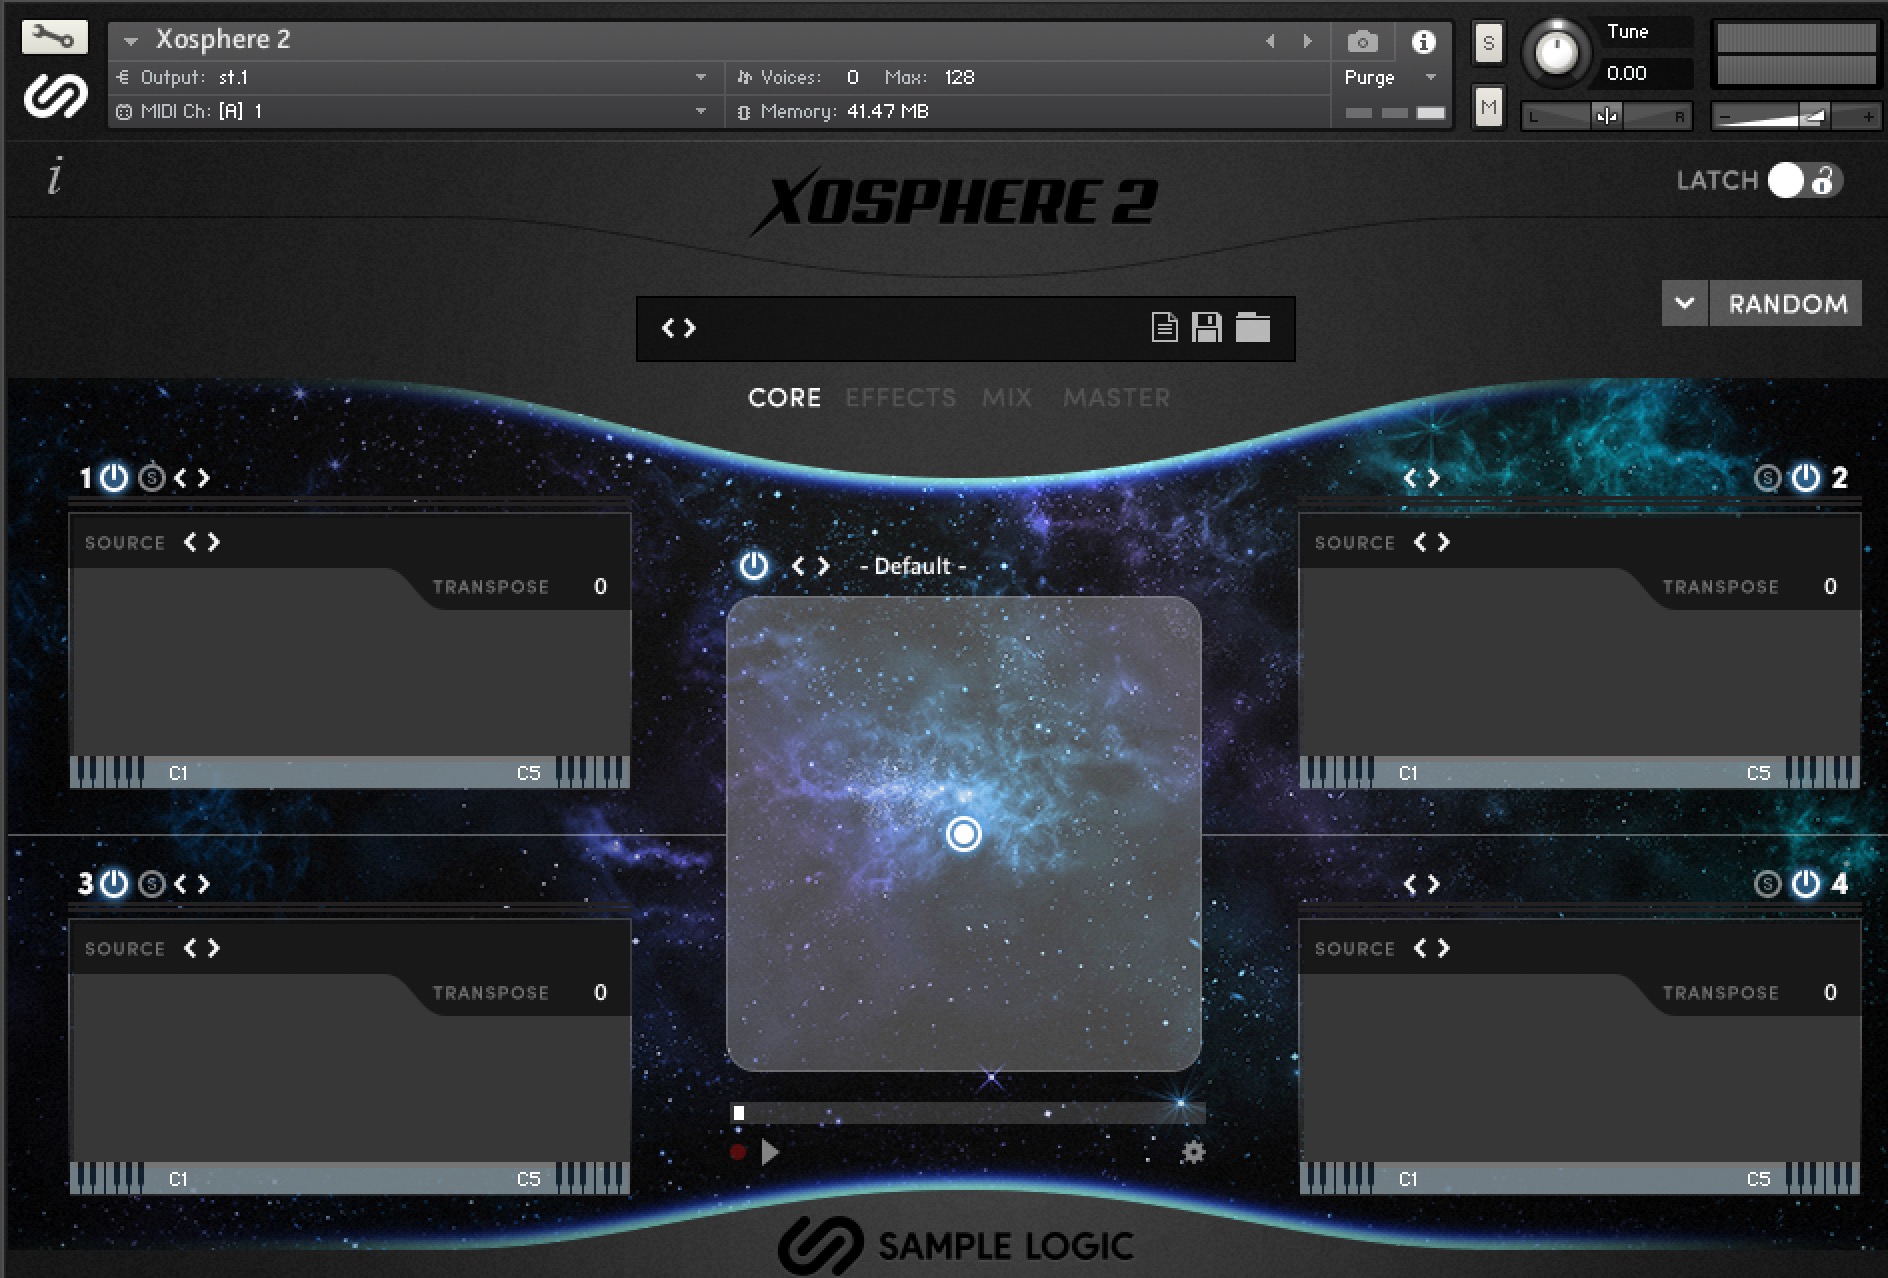 XOSPHERE 2 An Most Creative Atmosphere Engine by Sample Logic Review Issues